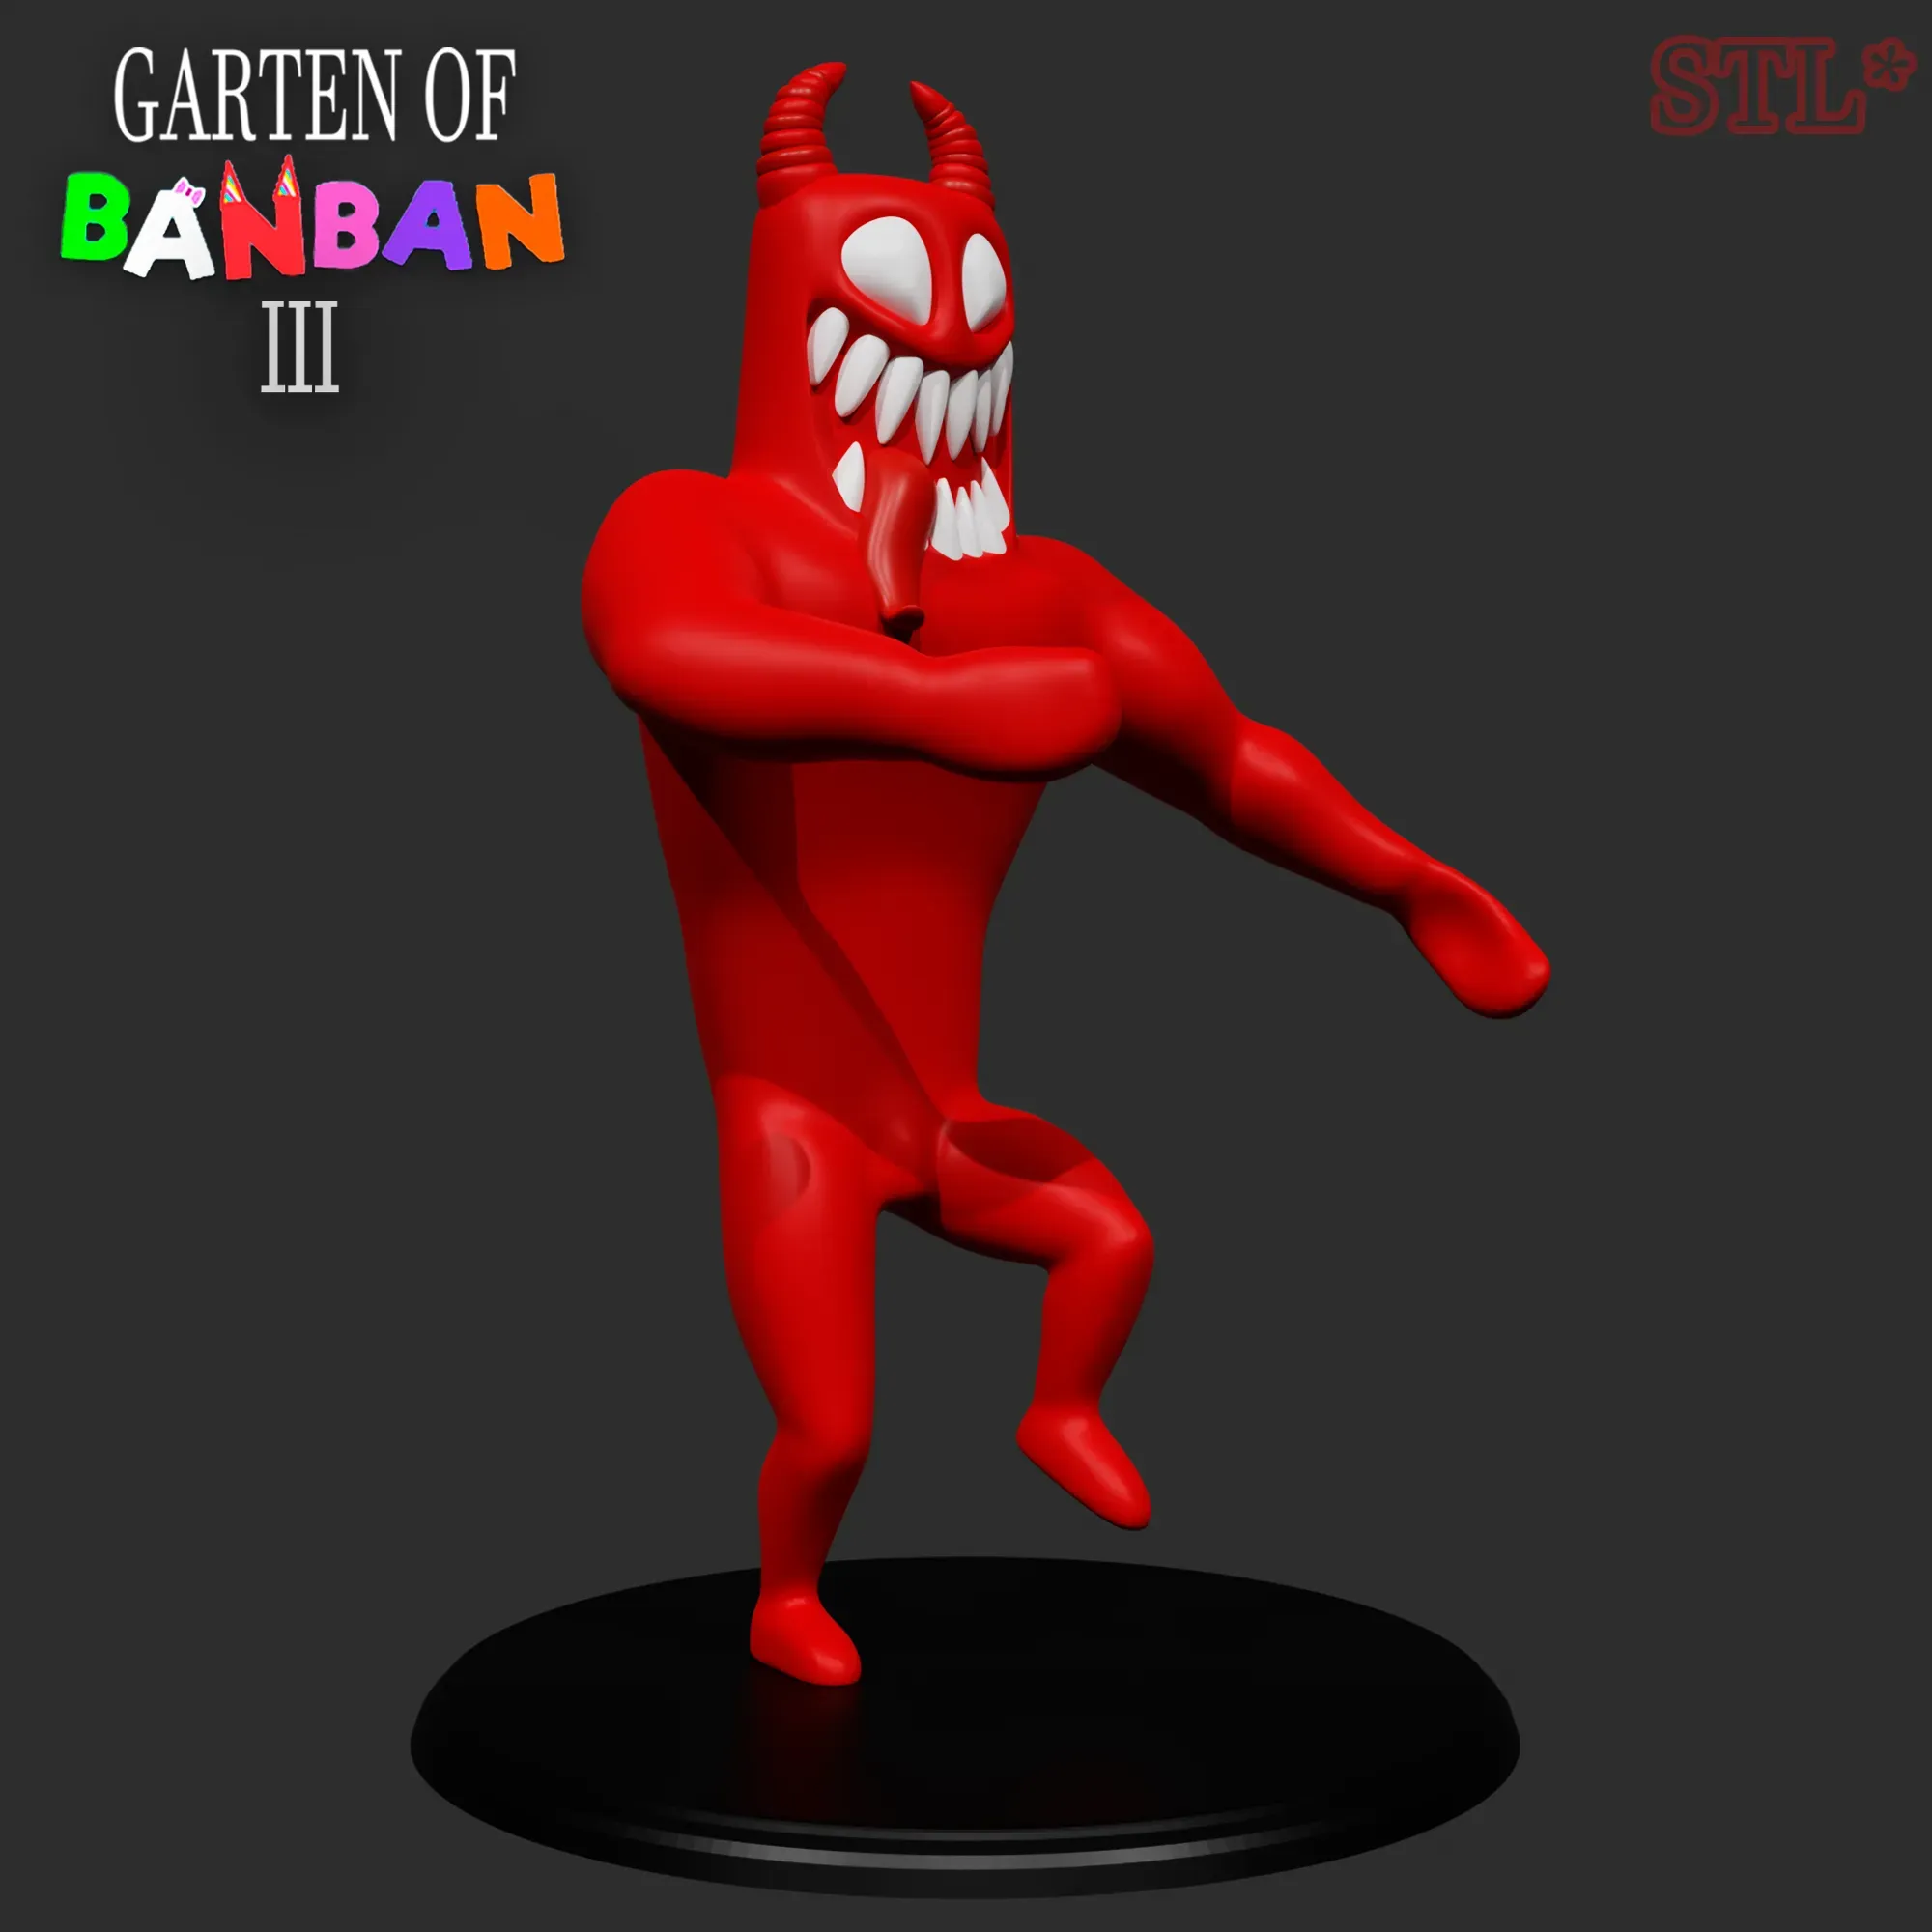 Monster the Jester from the game Garten of Banban 3.